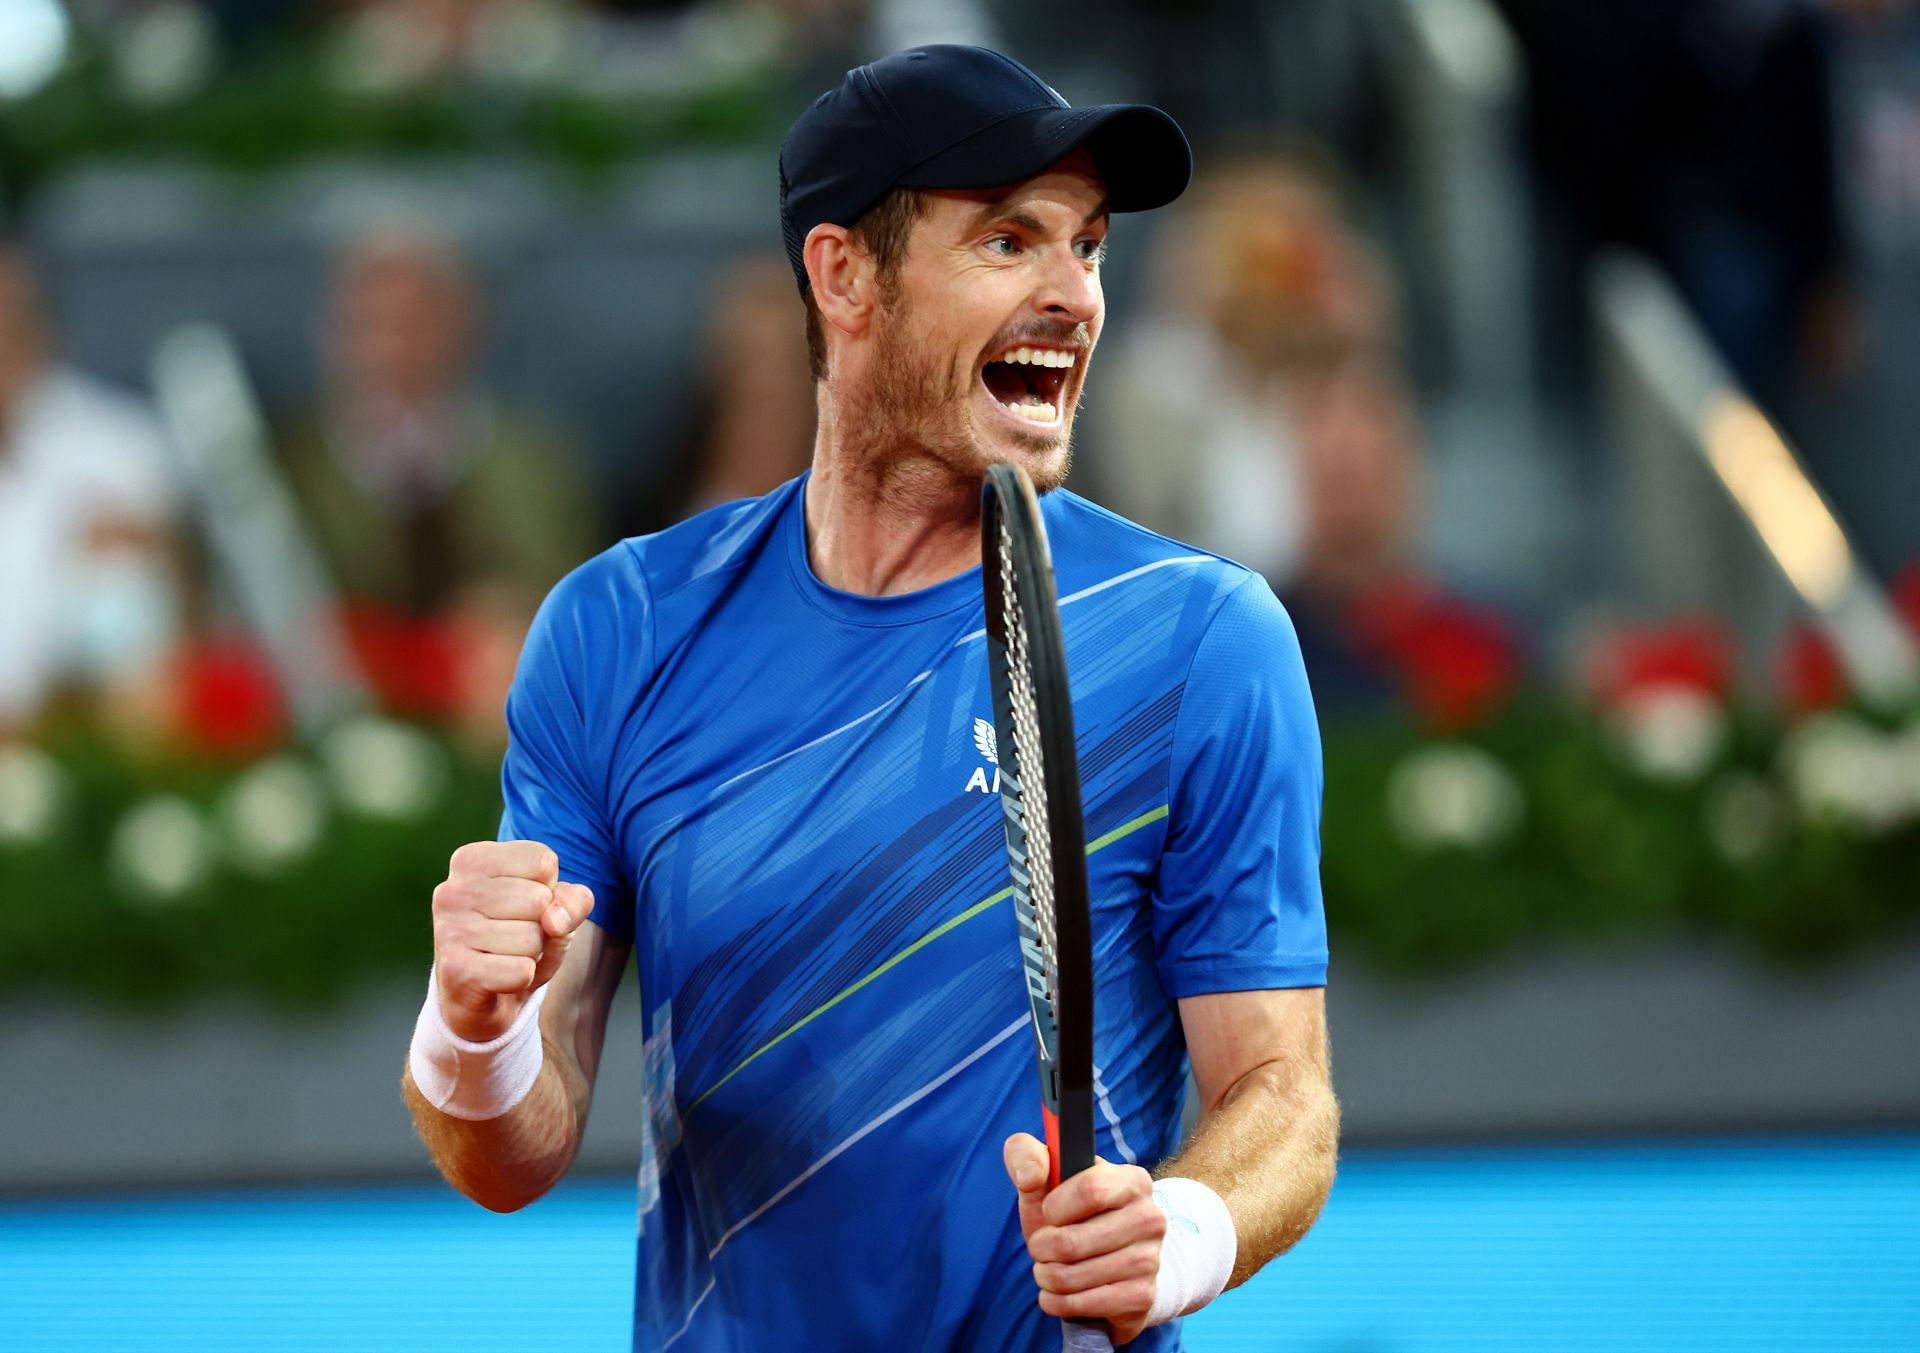 British tennis great Andy Murray at the Mutua Madrid Open - Day Five